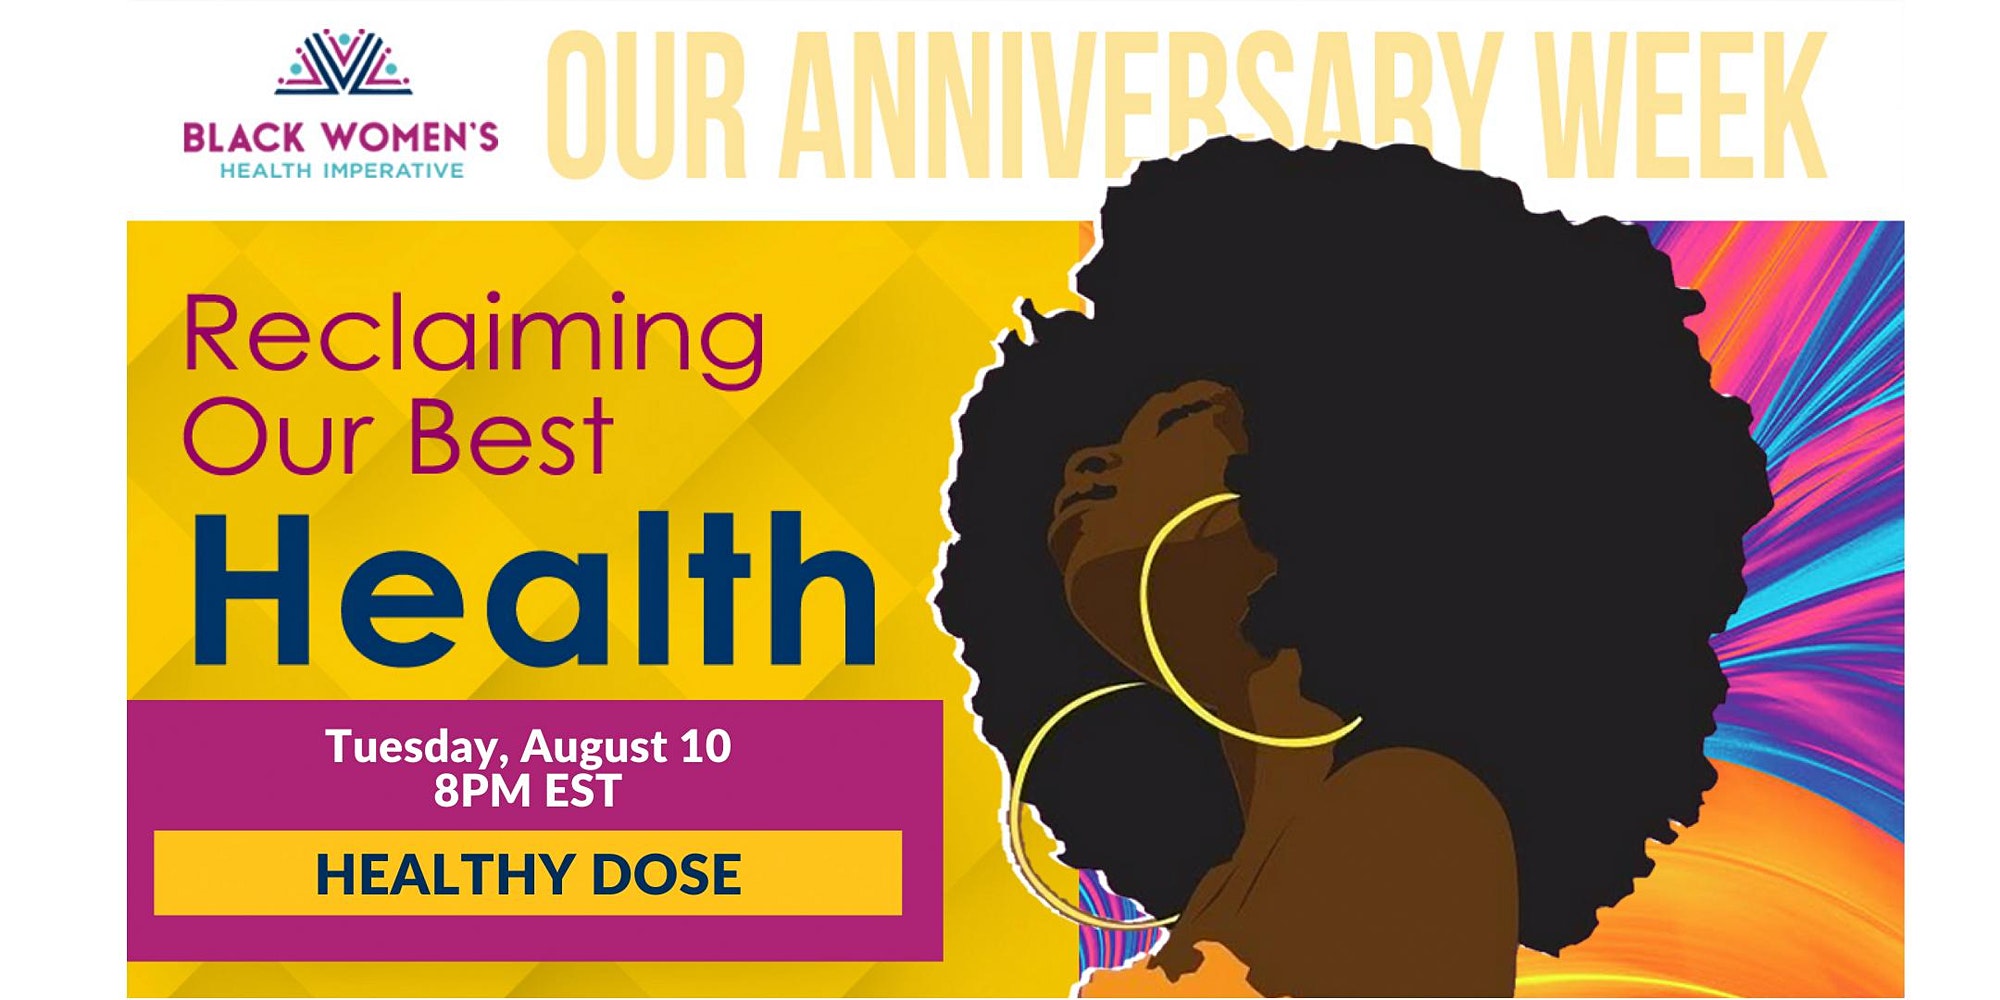 Healthy Dose  Myths, Facts and Feelings: BWHI Anniversary Week